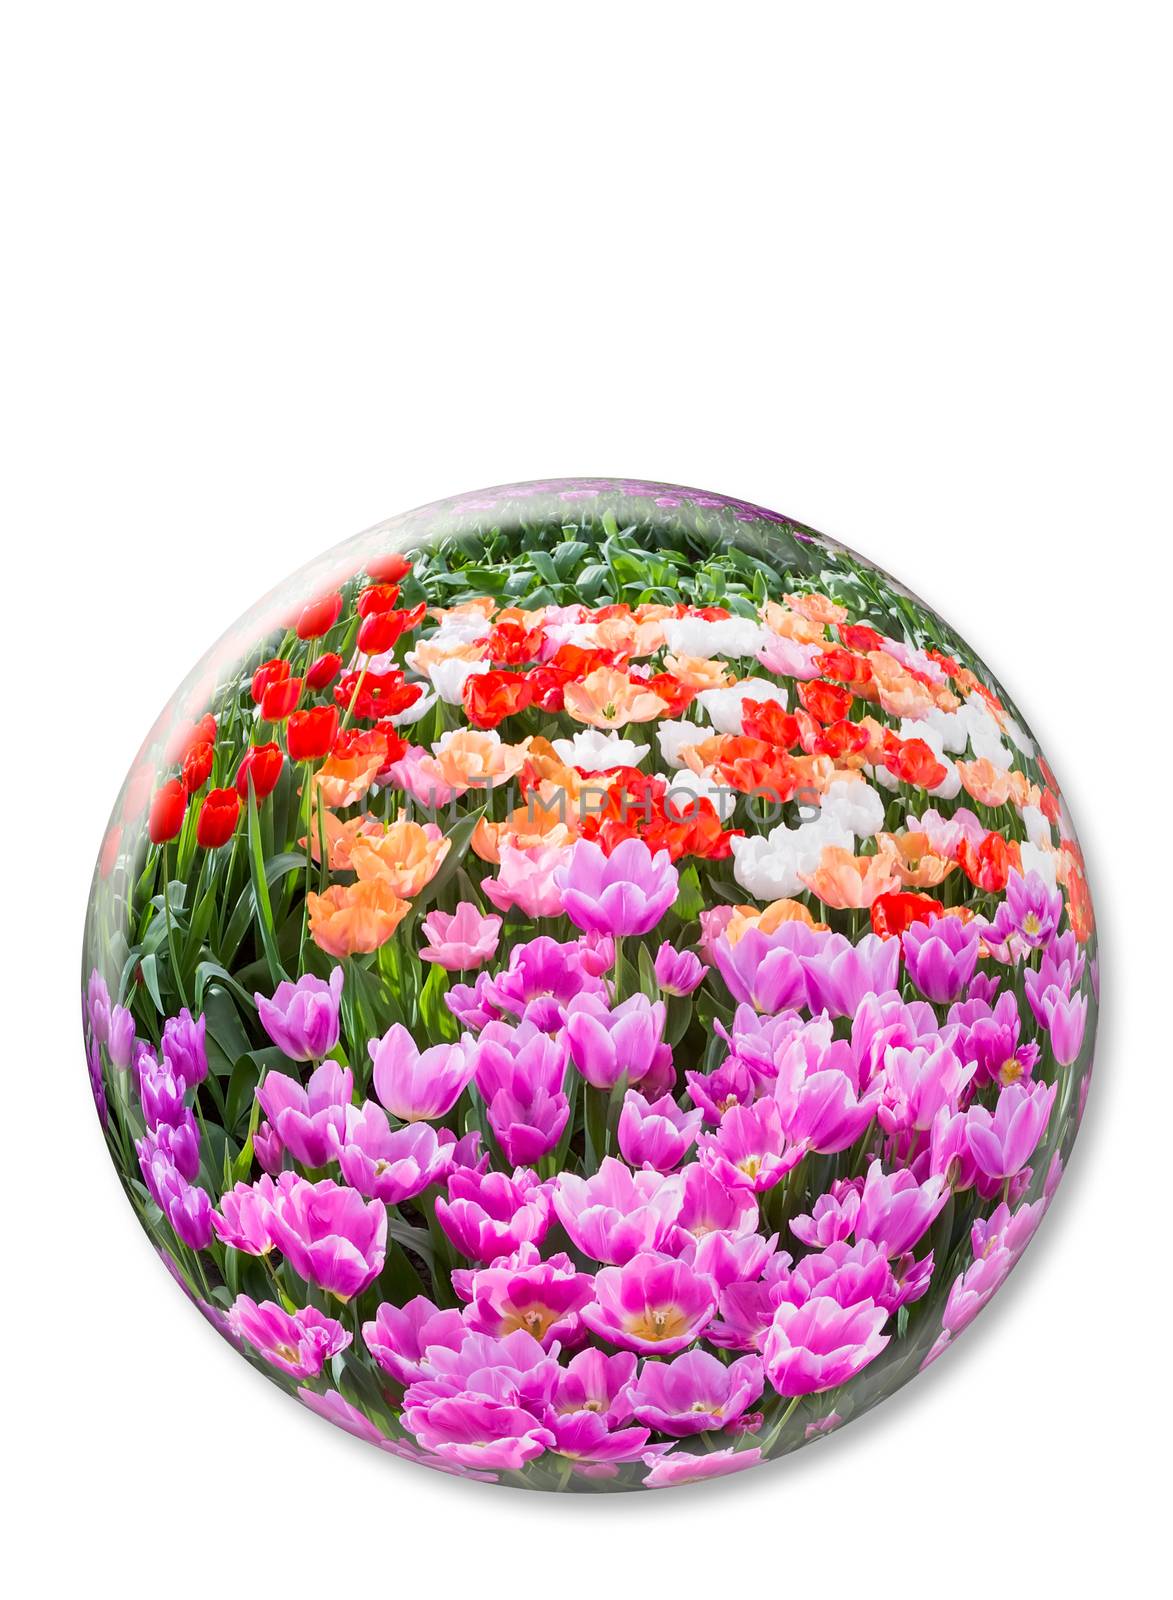 Crystal ball with various colored tulips on white background by BenSchonewille